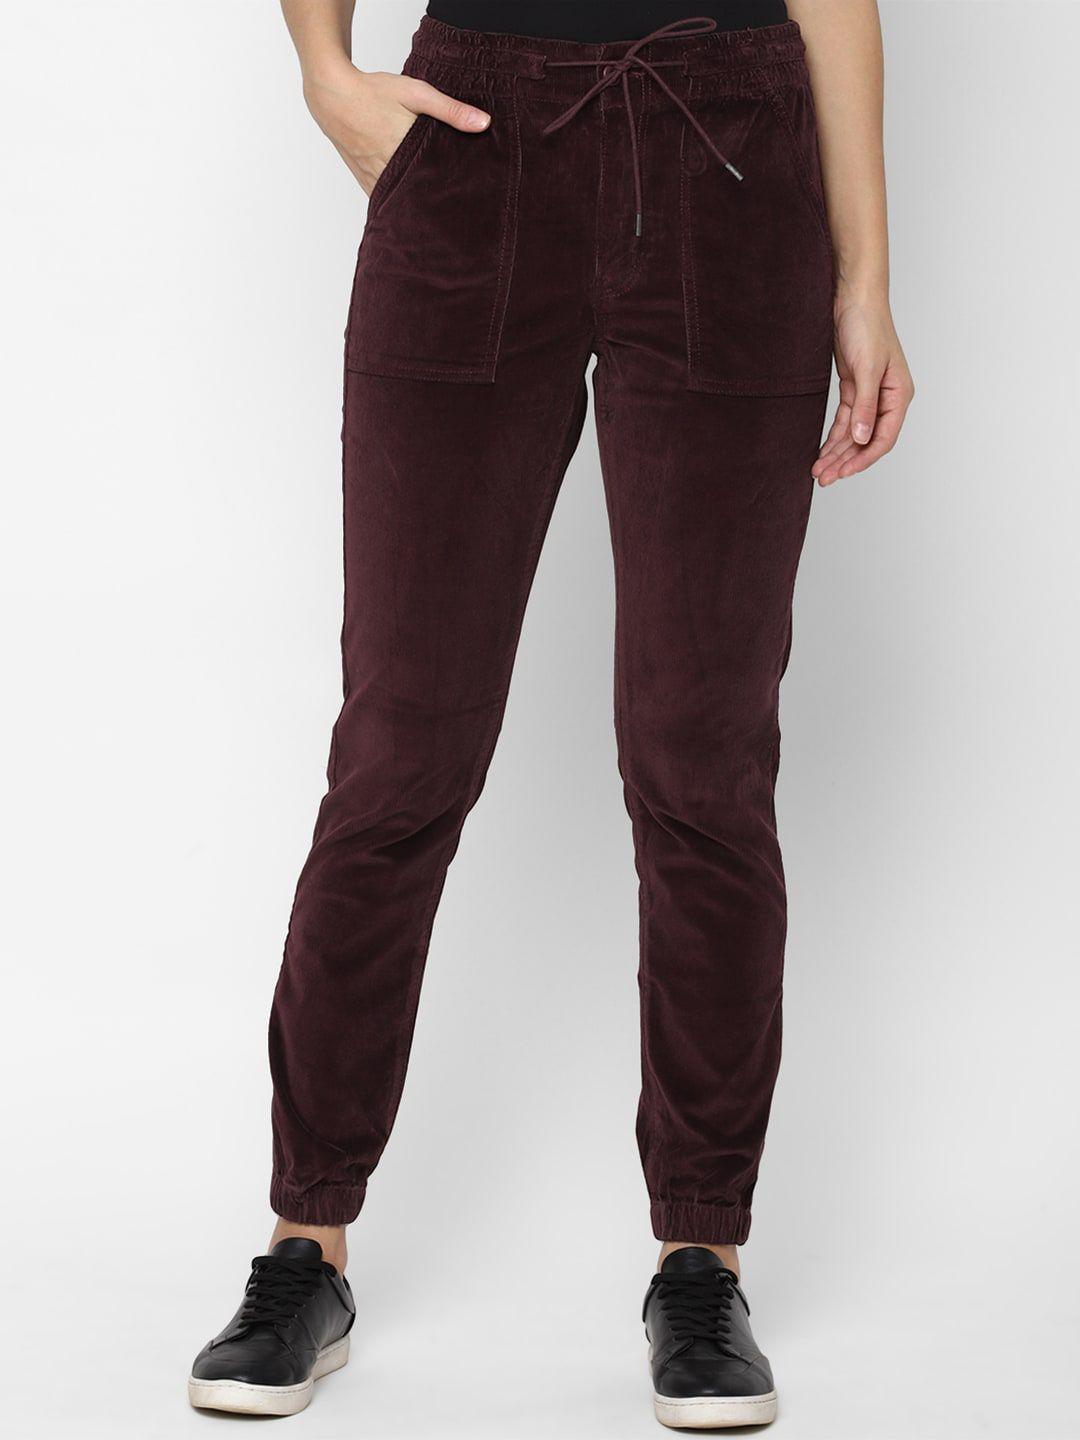 american-eagle-outfitters-women-burgundy-solid-slim-fit-joggers